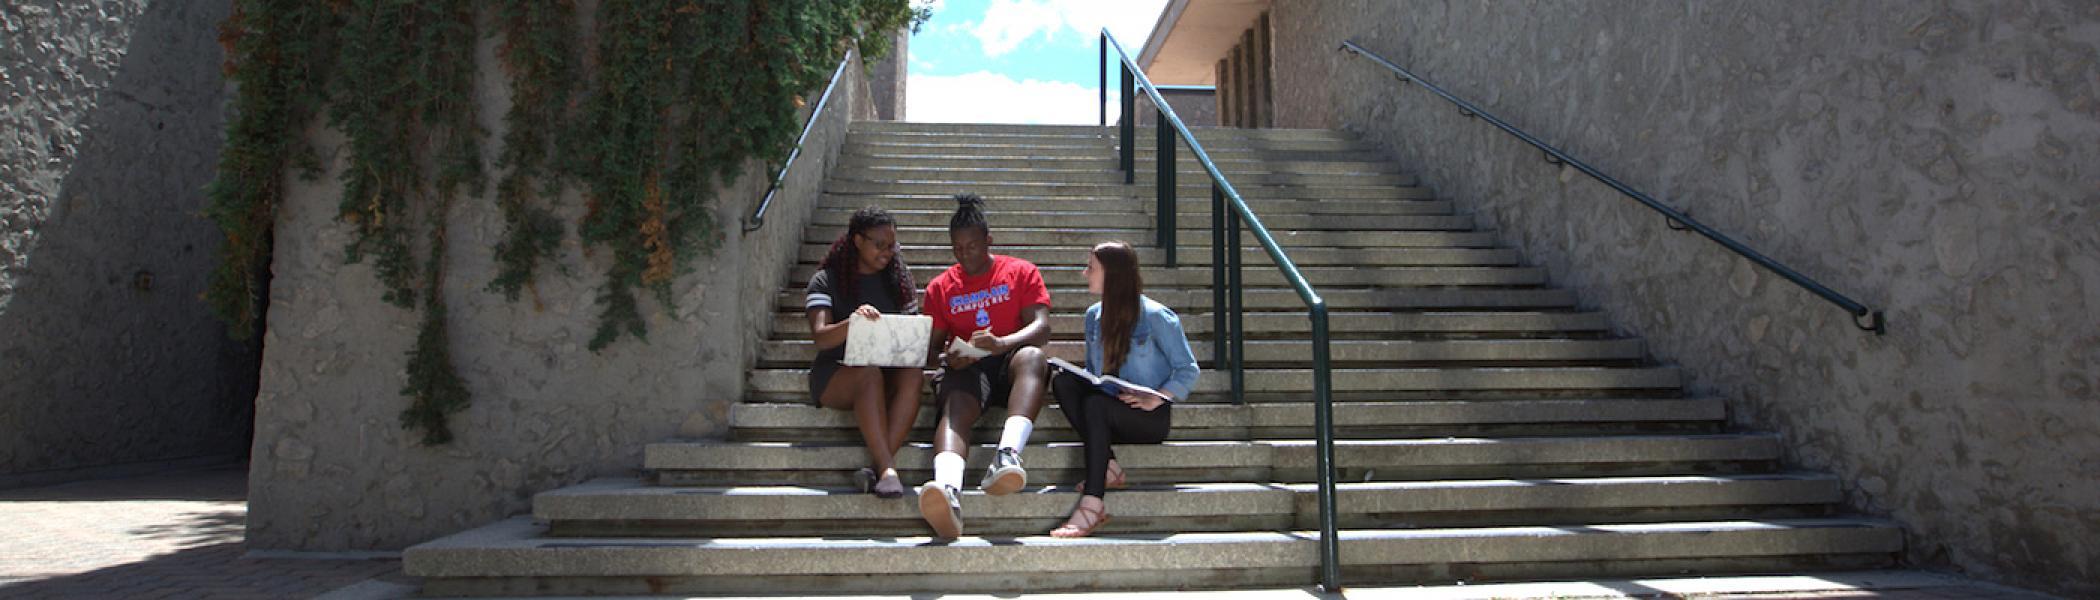 students sitting on stairs